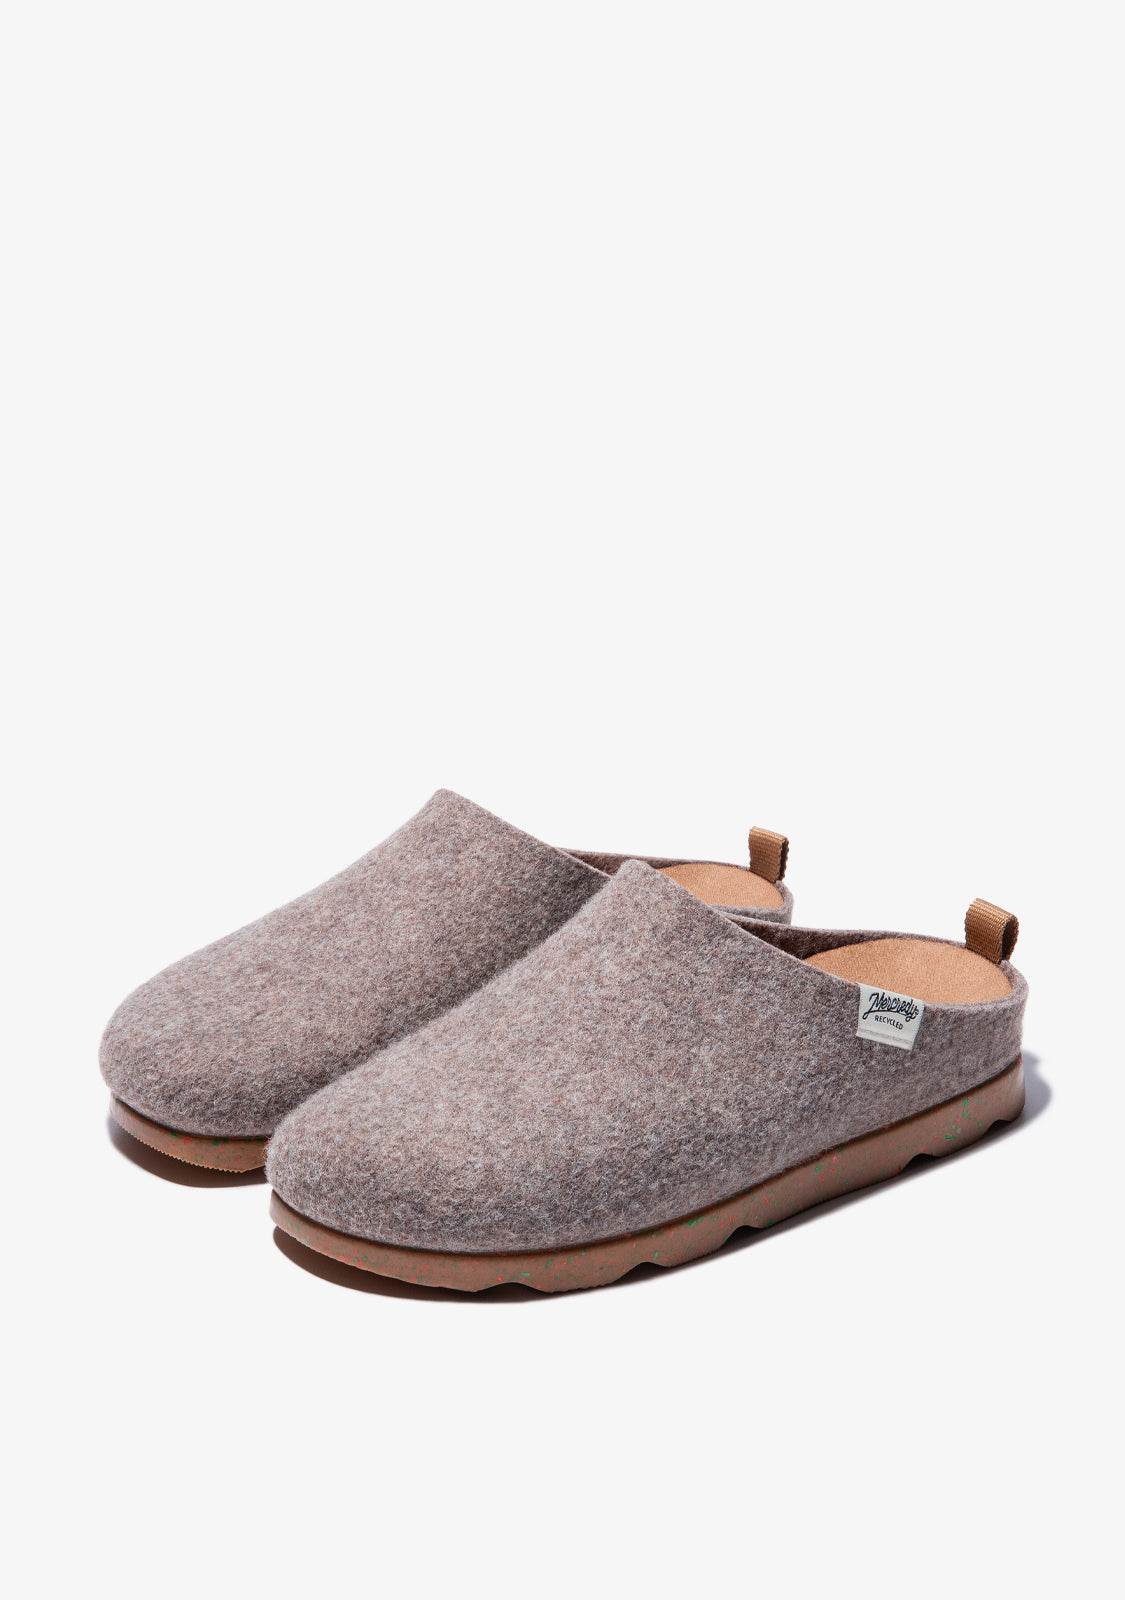 Mercredy Slipper Taupe / Brown